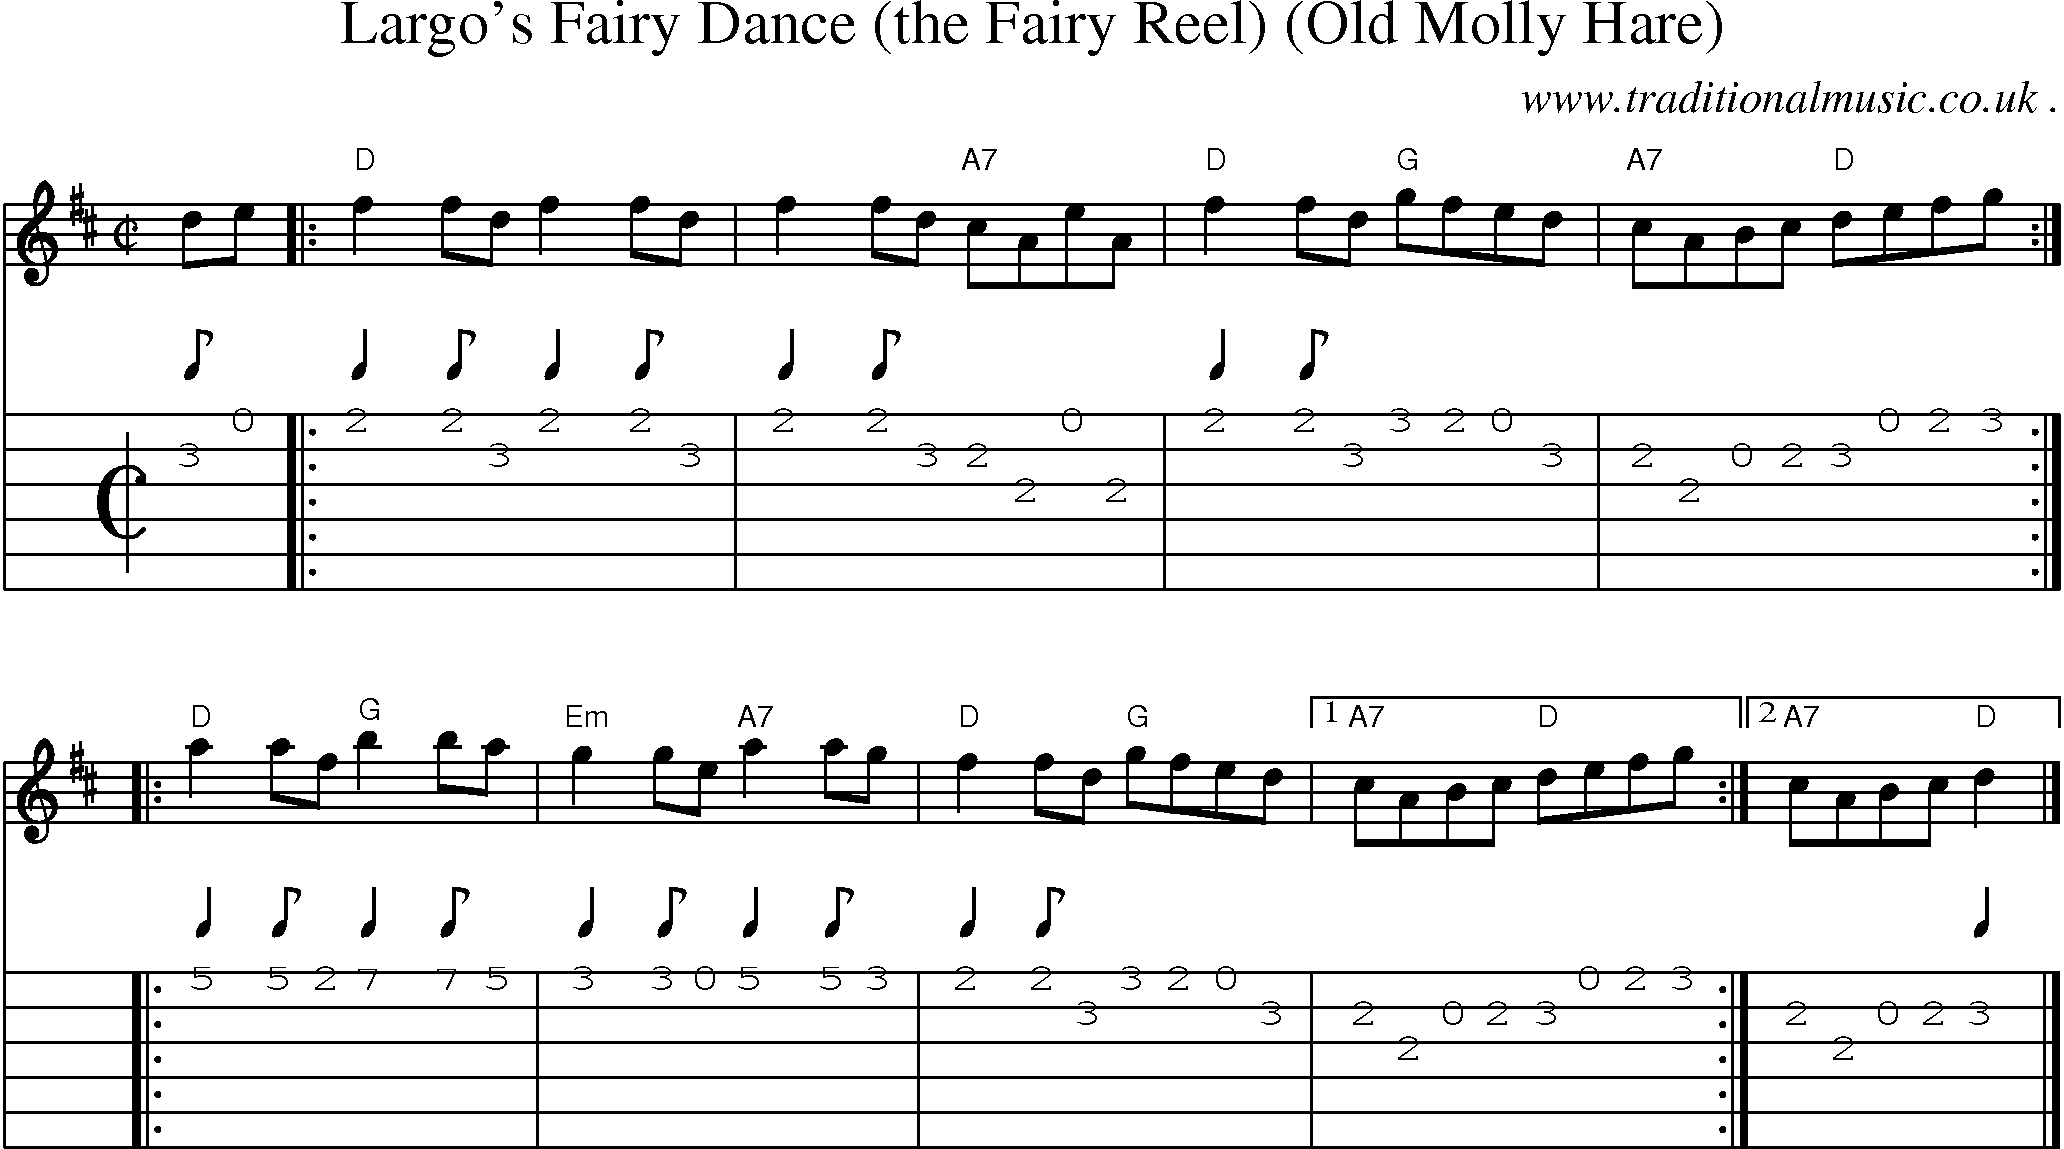 Sheet-music  score, Chords and Guitar Tabs for Largos Fairy Dance The Fairy Reel Old Molly Hare